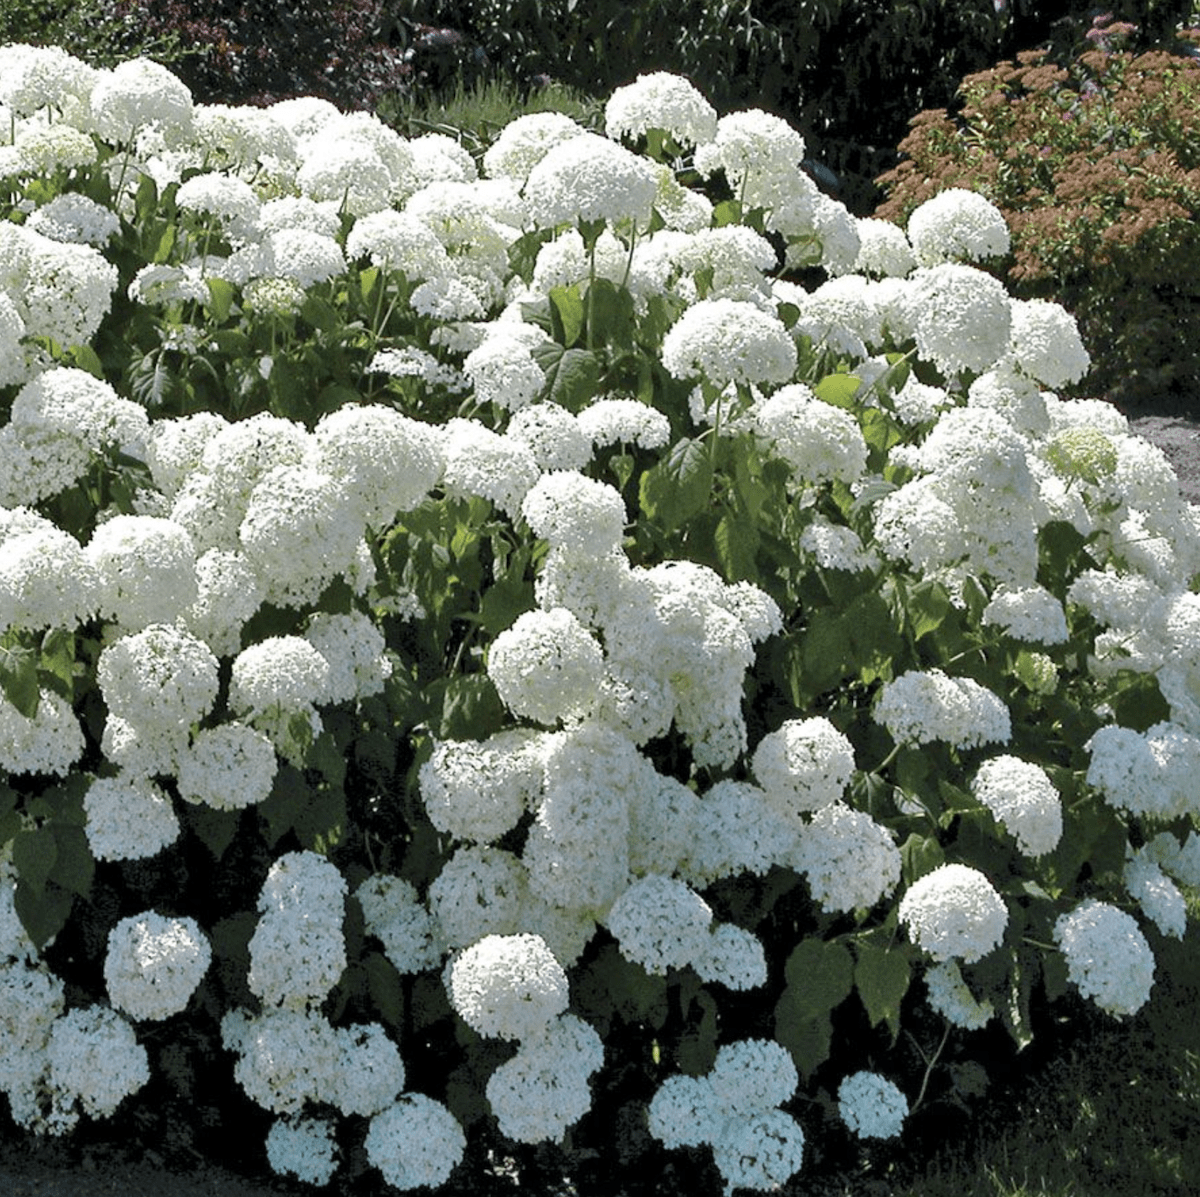 Chinese Snowball Bush Vs Hydrangea: What's the Difference?